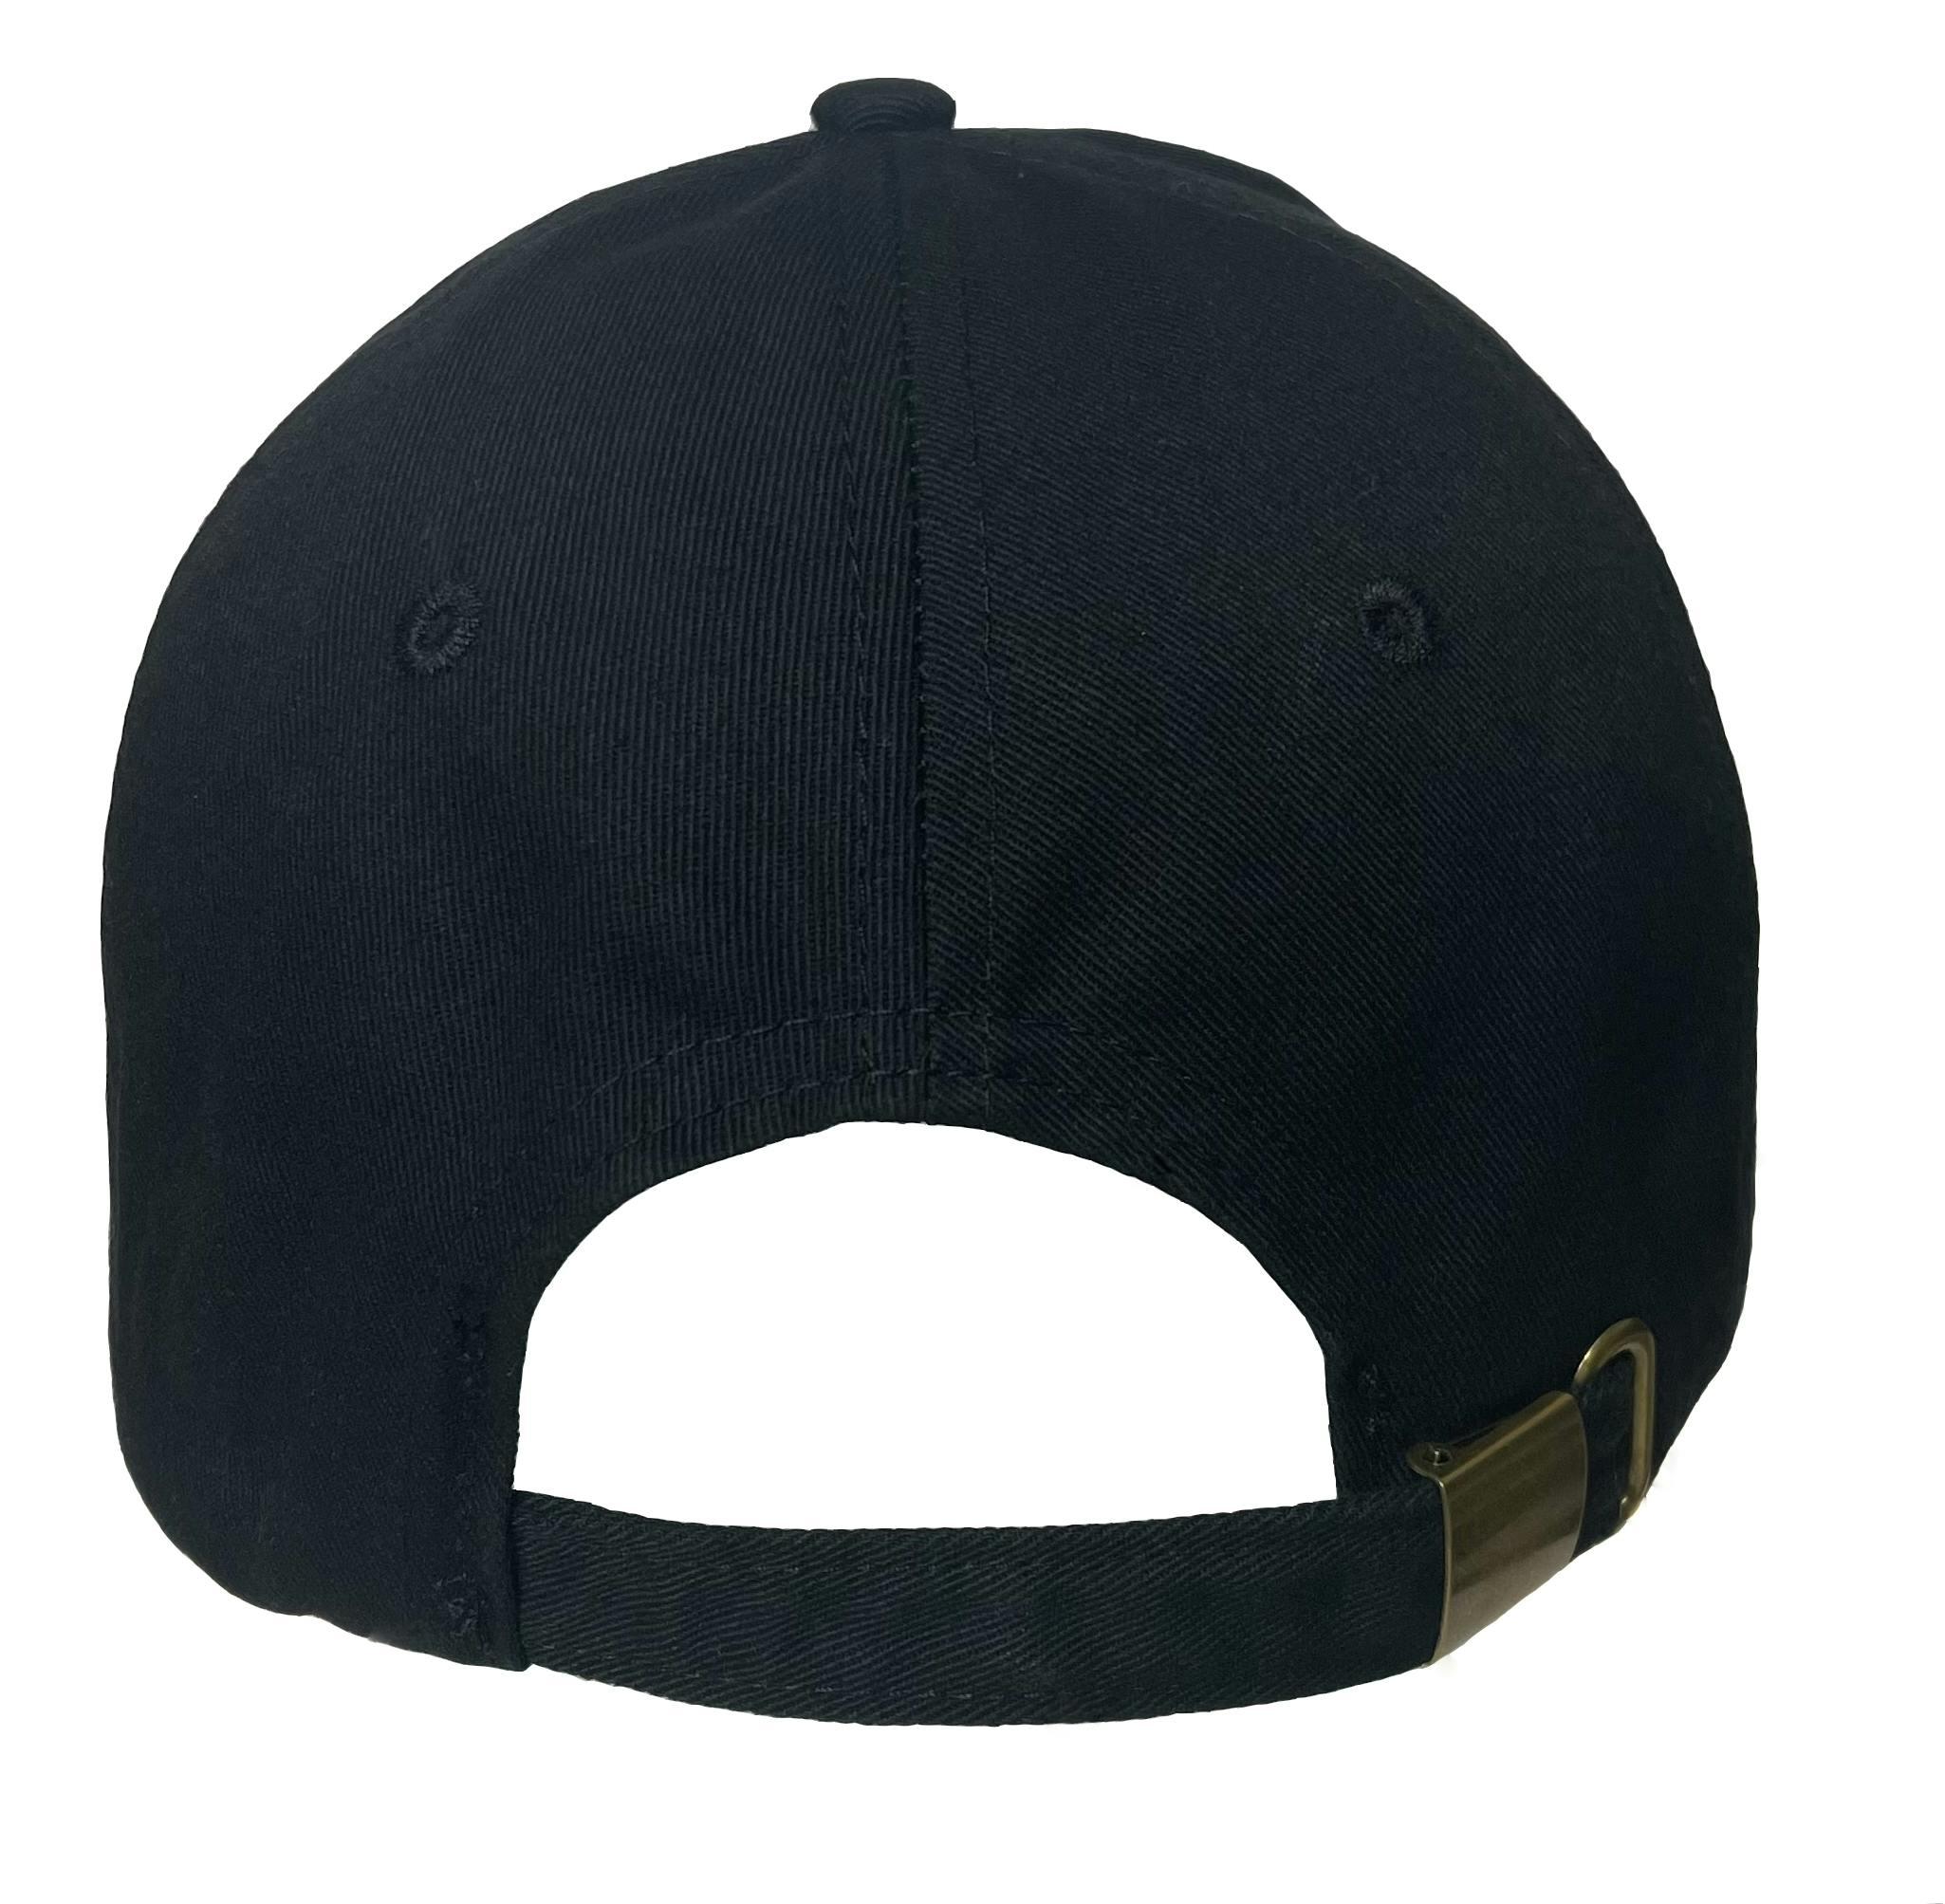 6 PANEL CHINO TWILL DAD CAP WITH BRASS BUCKLE CLOSURE